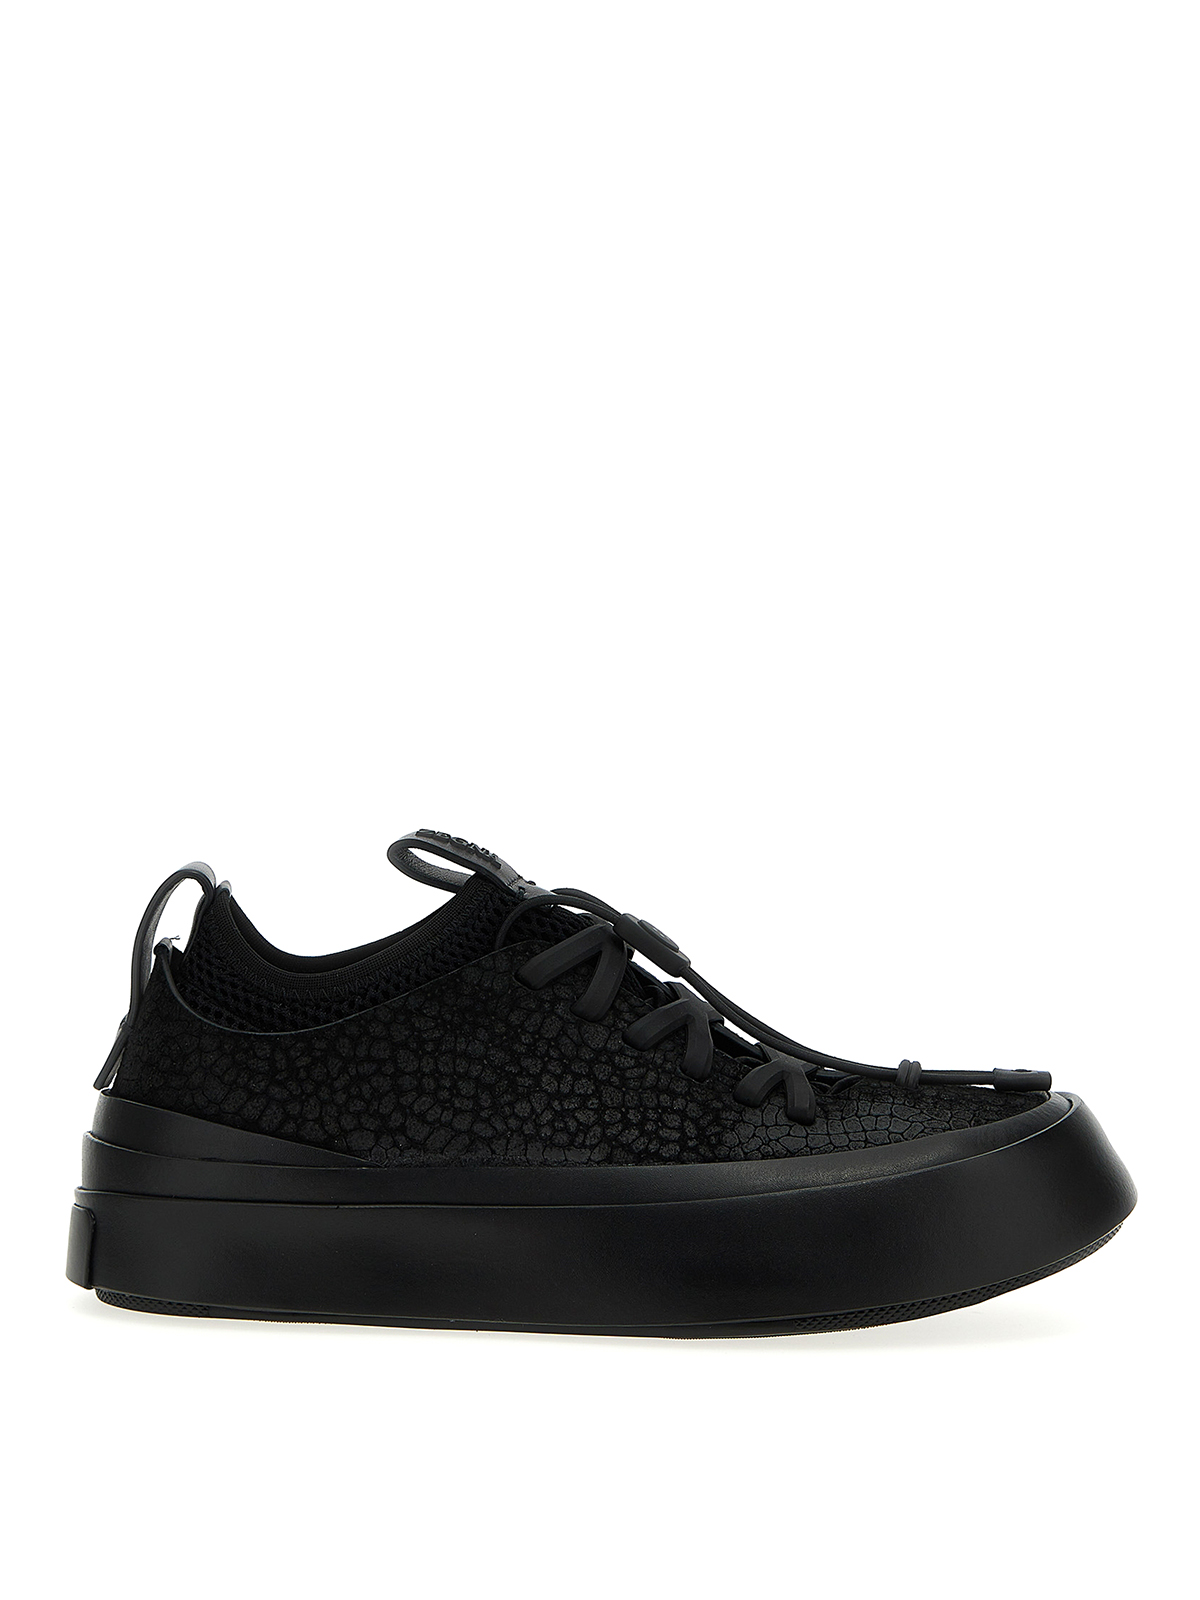 Trainers Zegna - Mr. bailey capsule sneakers - LHBAYS5536ZNER